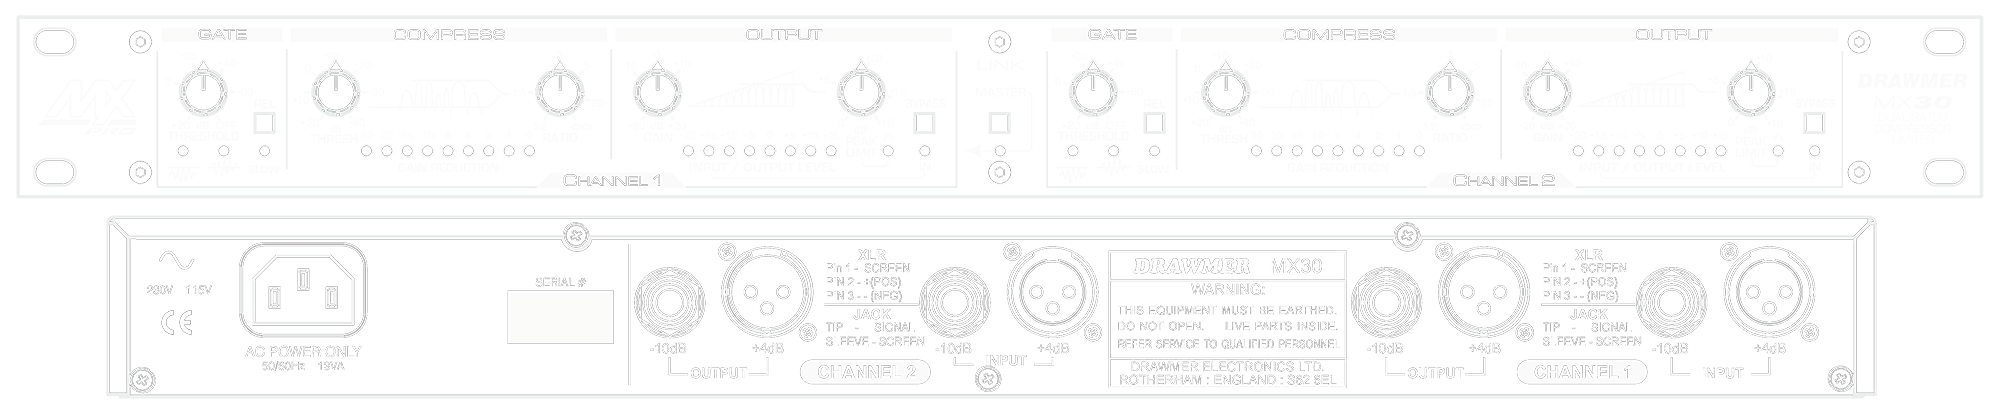 A line drawing of the front and rear panels of the MX30Pro showing controls and connectors